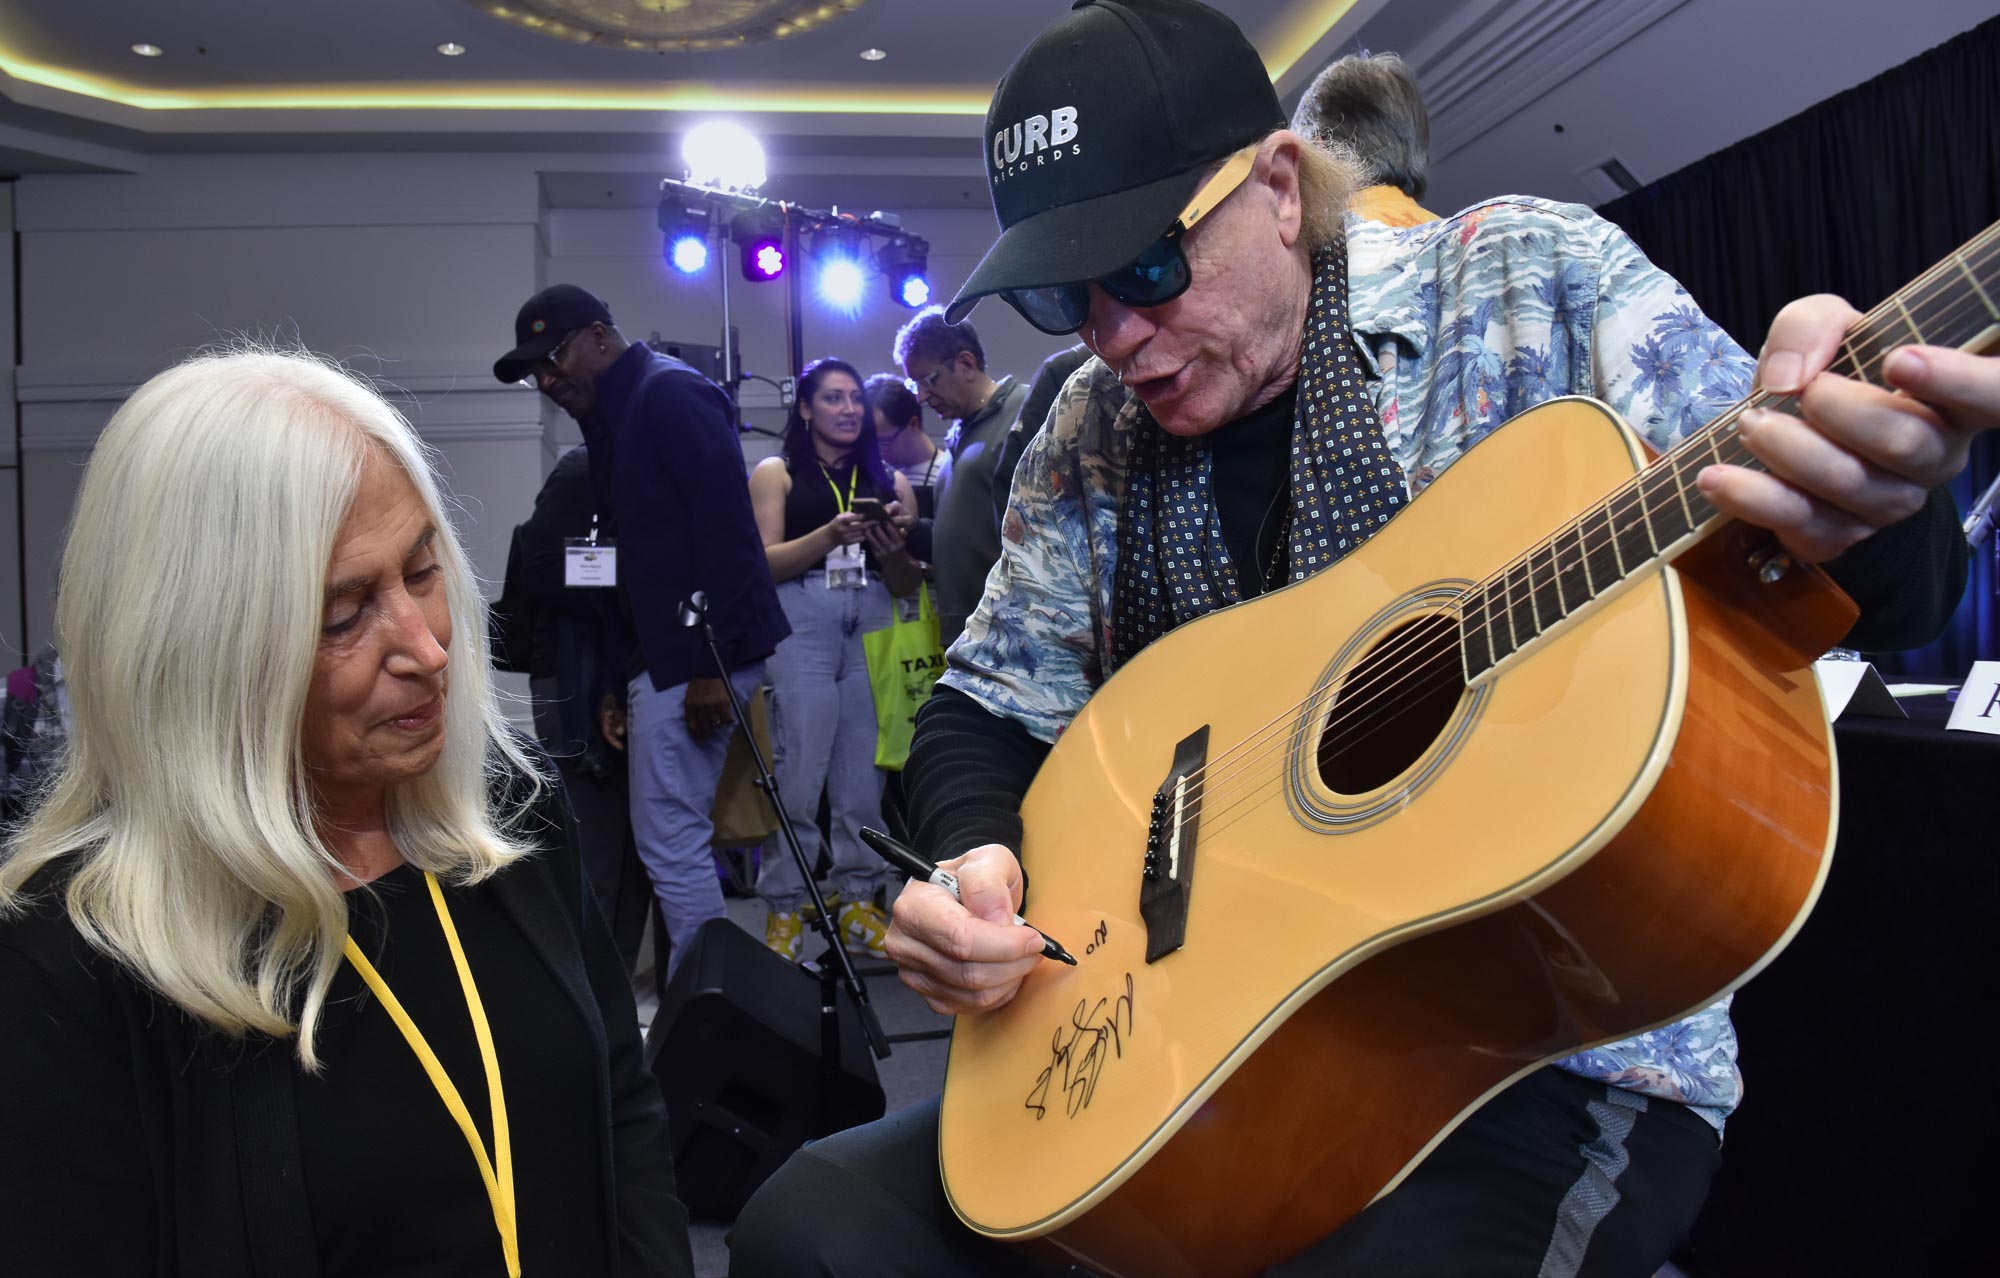 Producer, Michael Lloyd has more than 100 gold and platinum records to his credit, yet he remains the kind of person who donates a guitar as a prize every year — and even autographs it when the lucky winner asks him to!